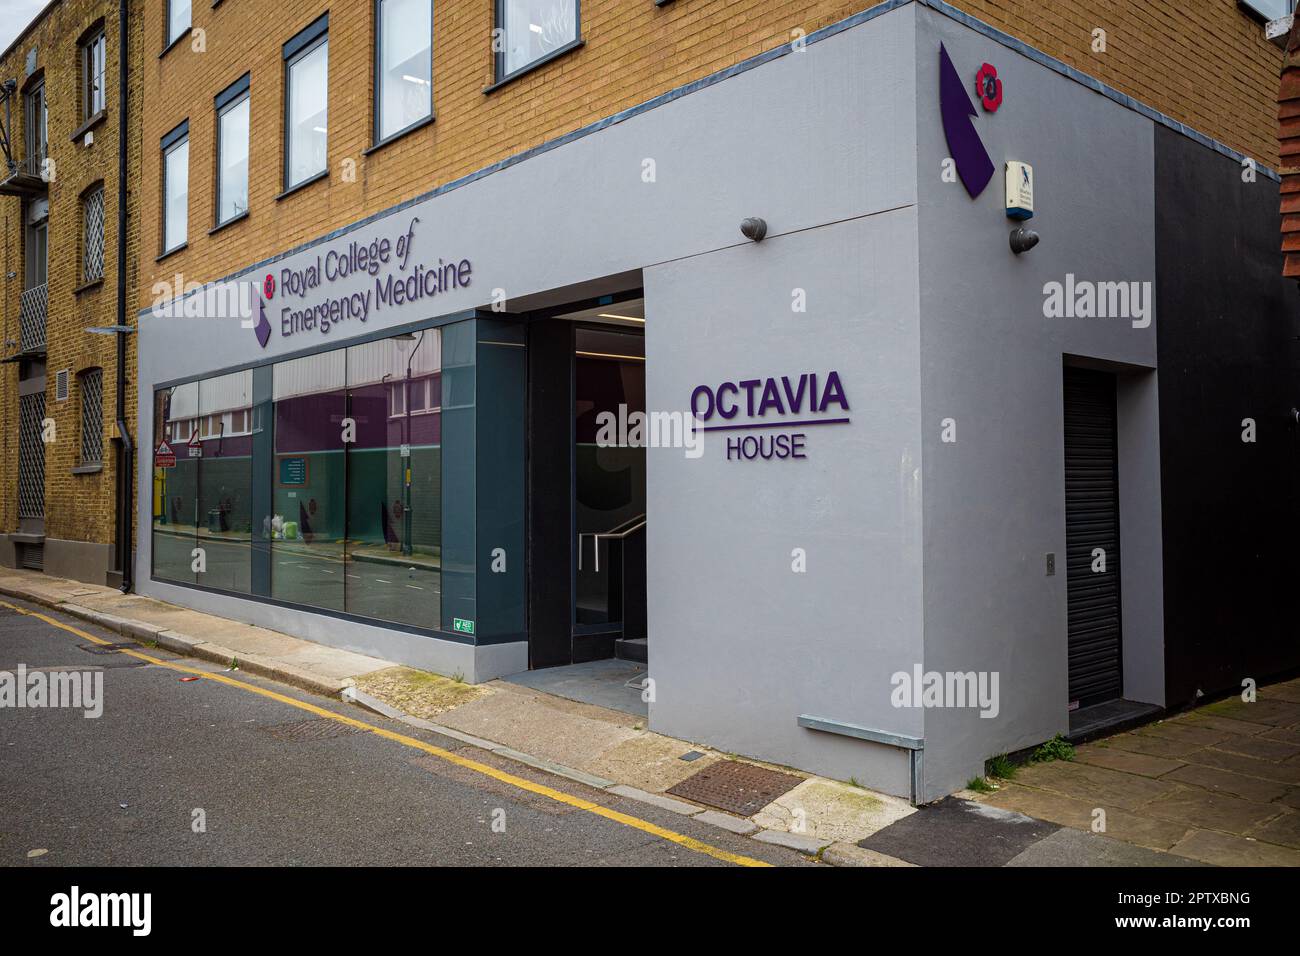 RCEM Royal College of Emergency Medicine HQ at Octavia House, 54 Ayres St, London. RCEM Headquarters London. Incorporated by royal charter in 2008 Stock Photo